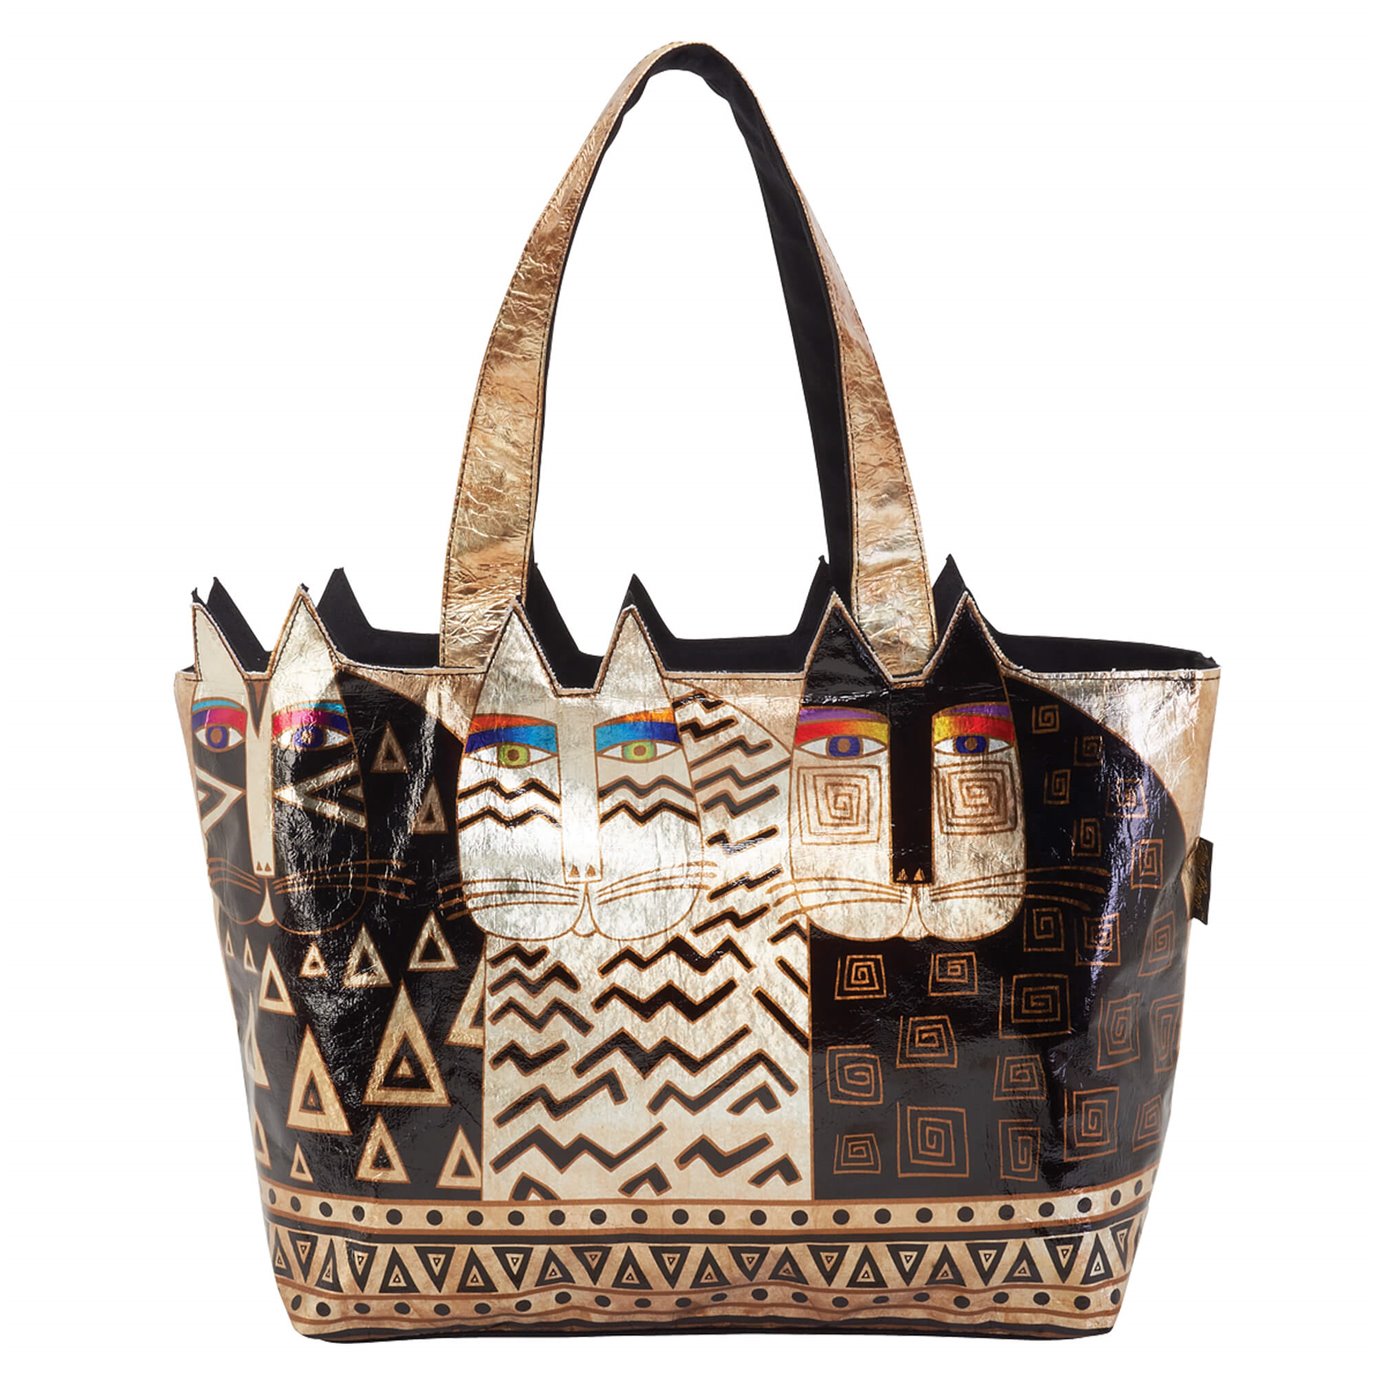 Laurel Burch Wild Cats Large Foiled Cut Out Tote